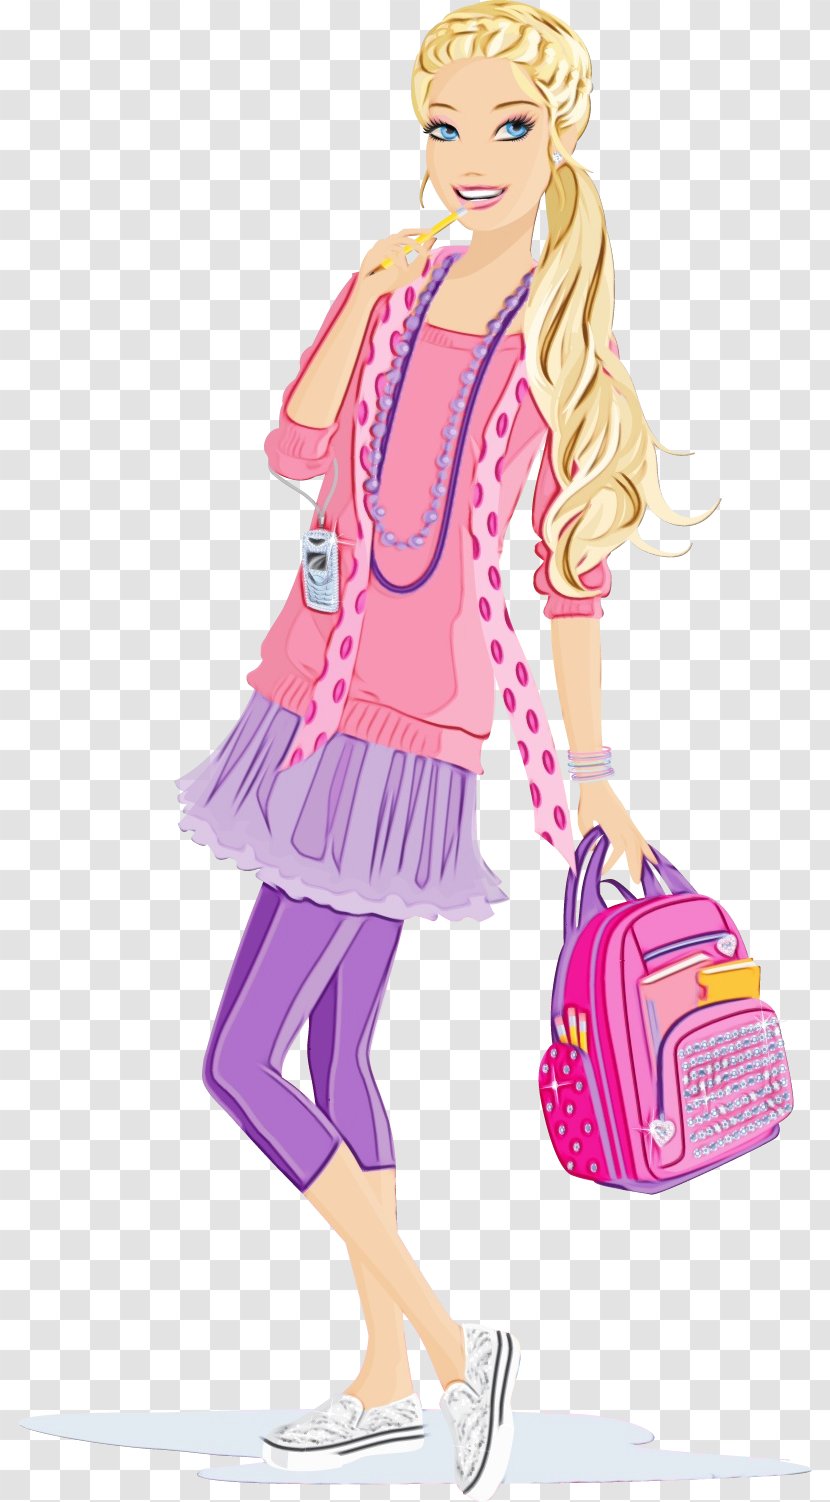 Hair Style - Toy - Bag Transparent PNG